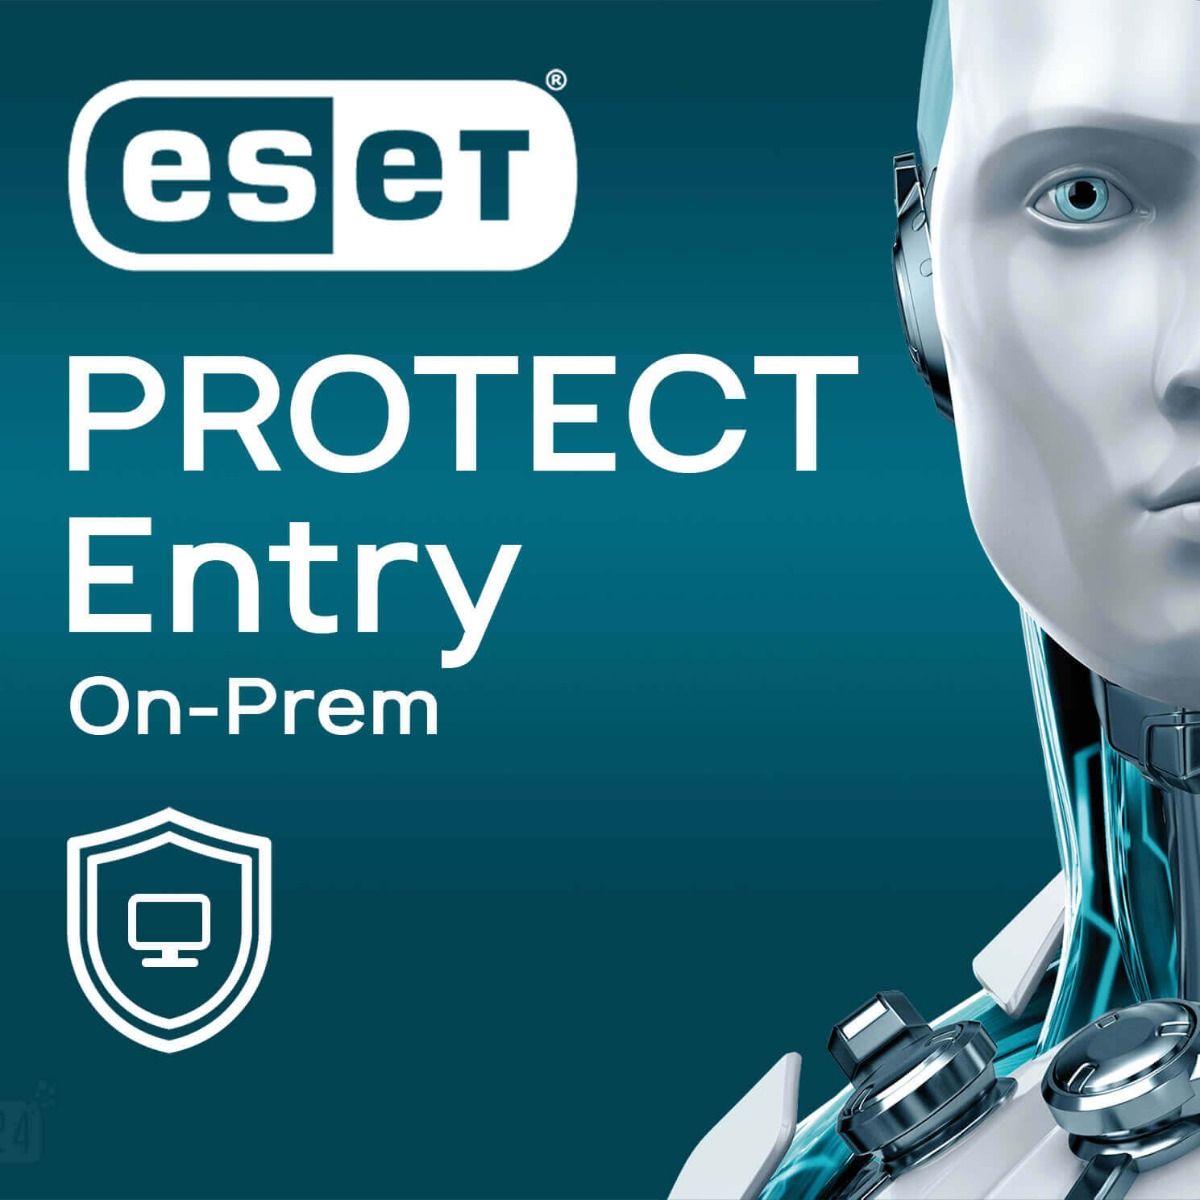 ESET Protect Entry On-Premise 3-Year Subscription Renewal License